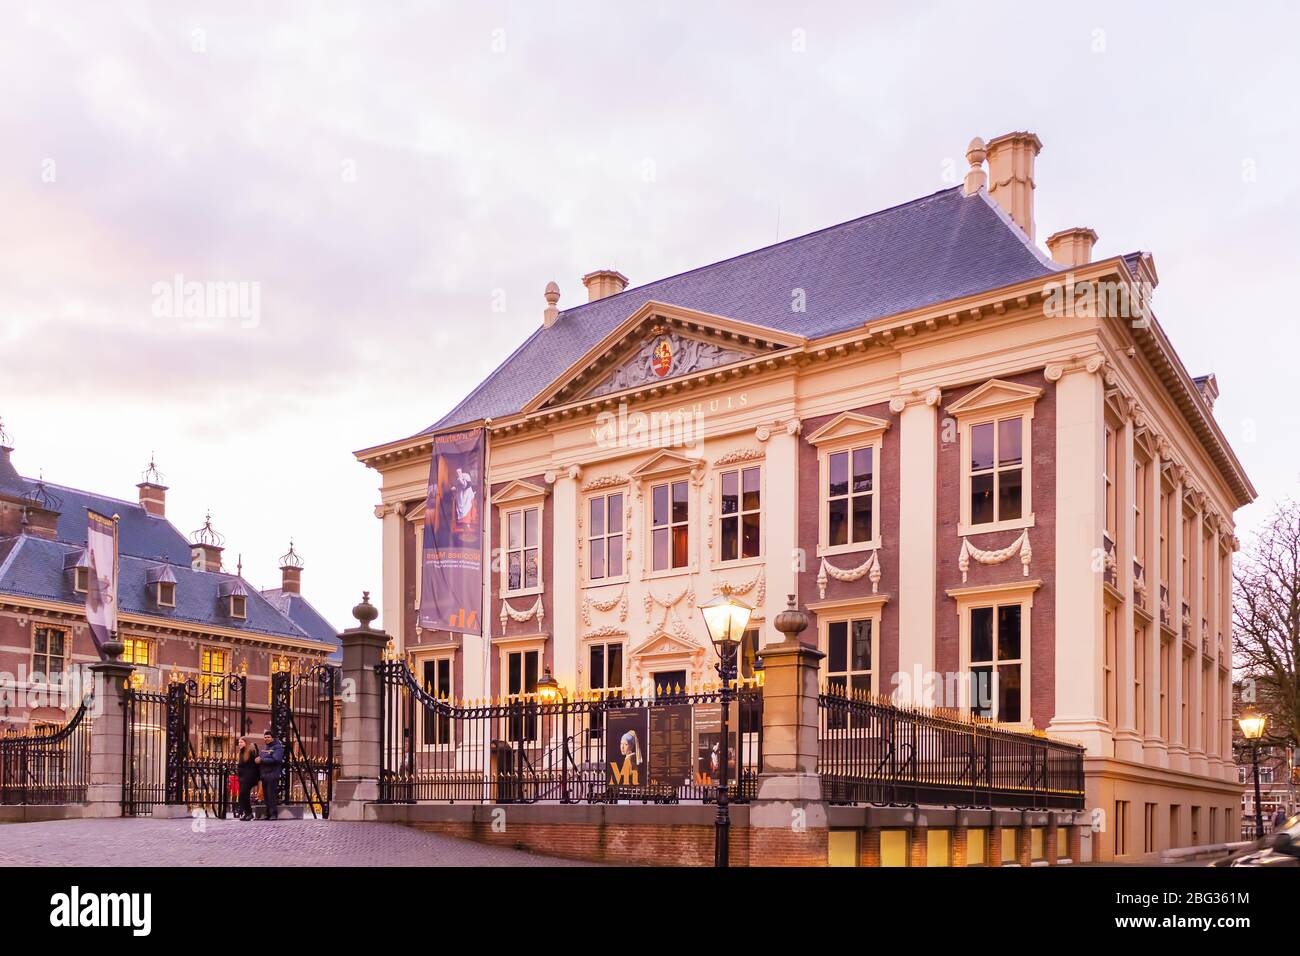 The Hague, The Netherlands - January 15, 2020: The Mauritshuis museum building during sunset in The Hague, The Netherlands Stock Photo